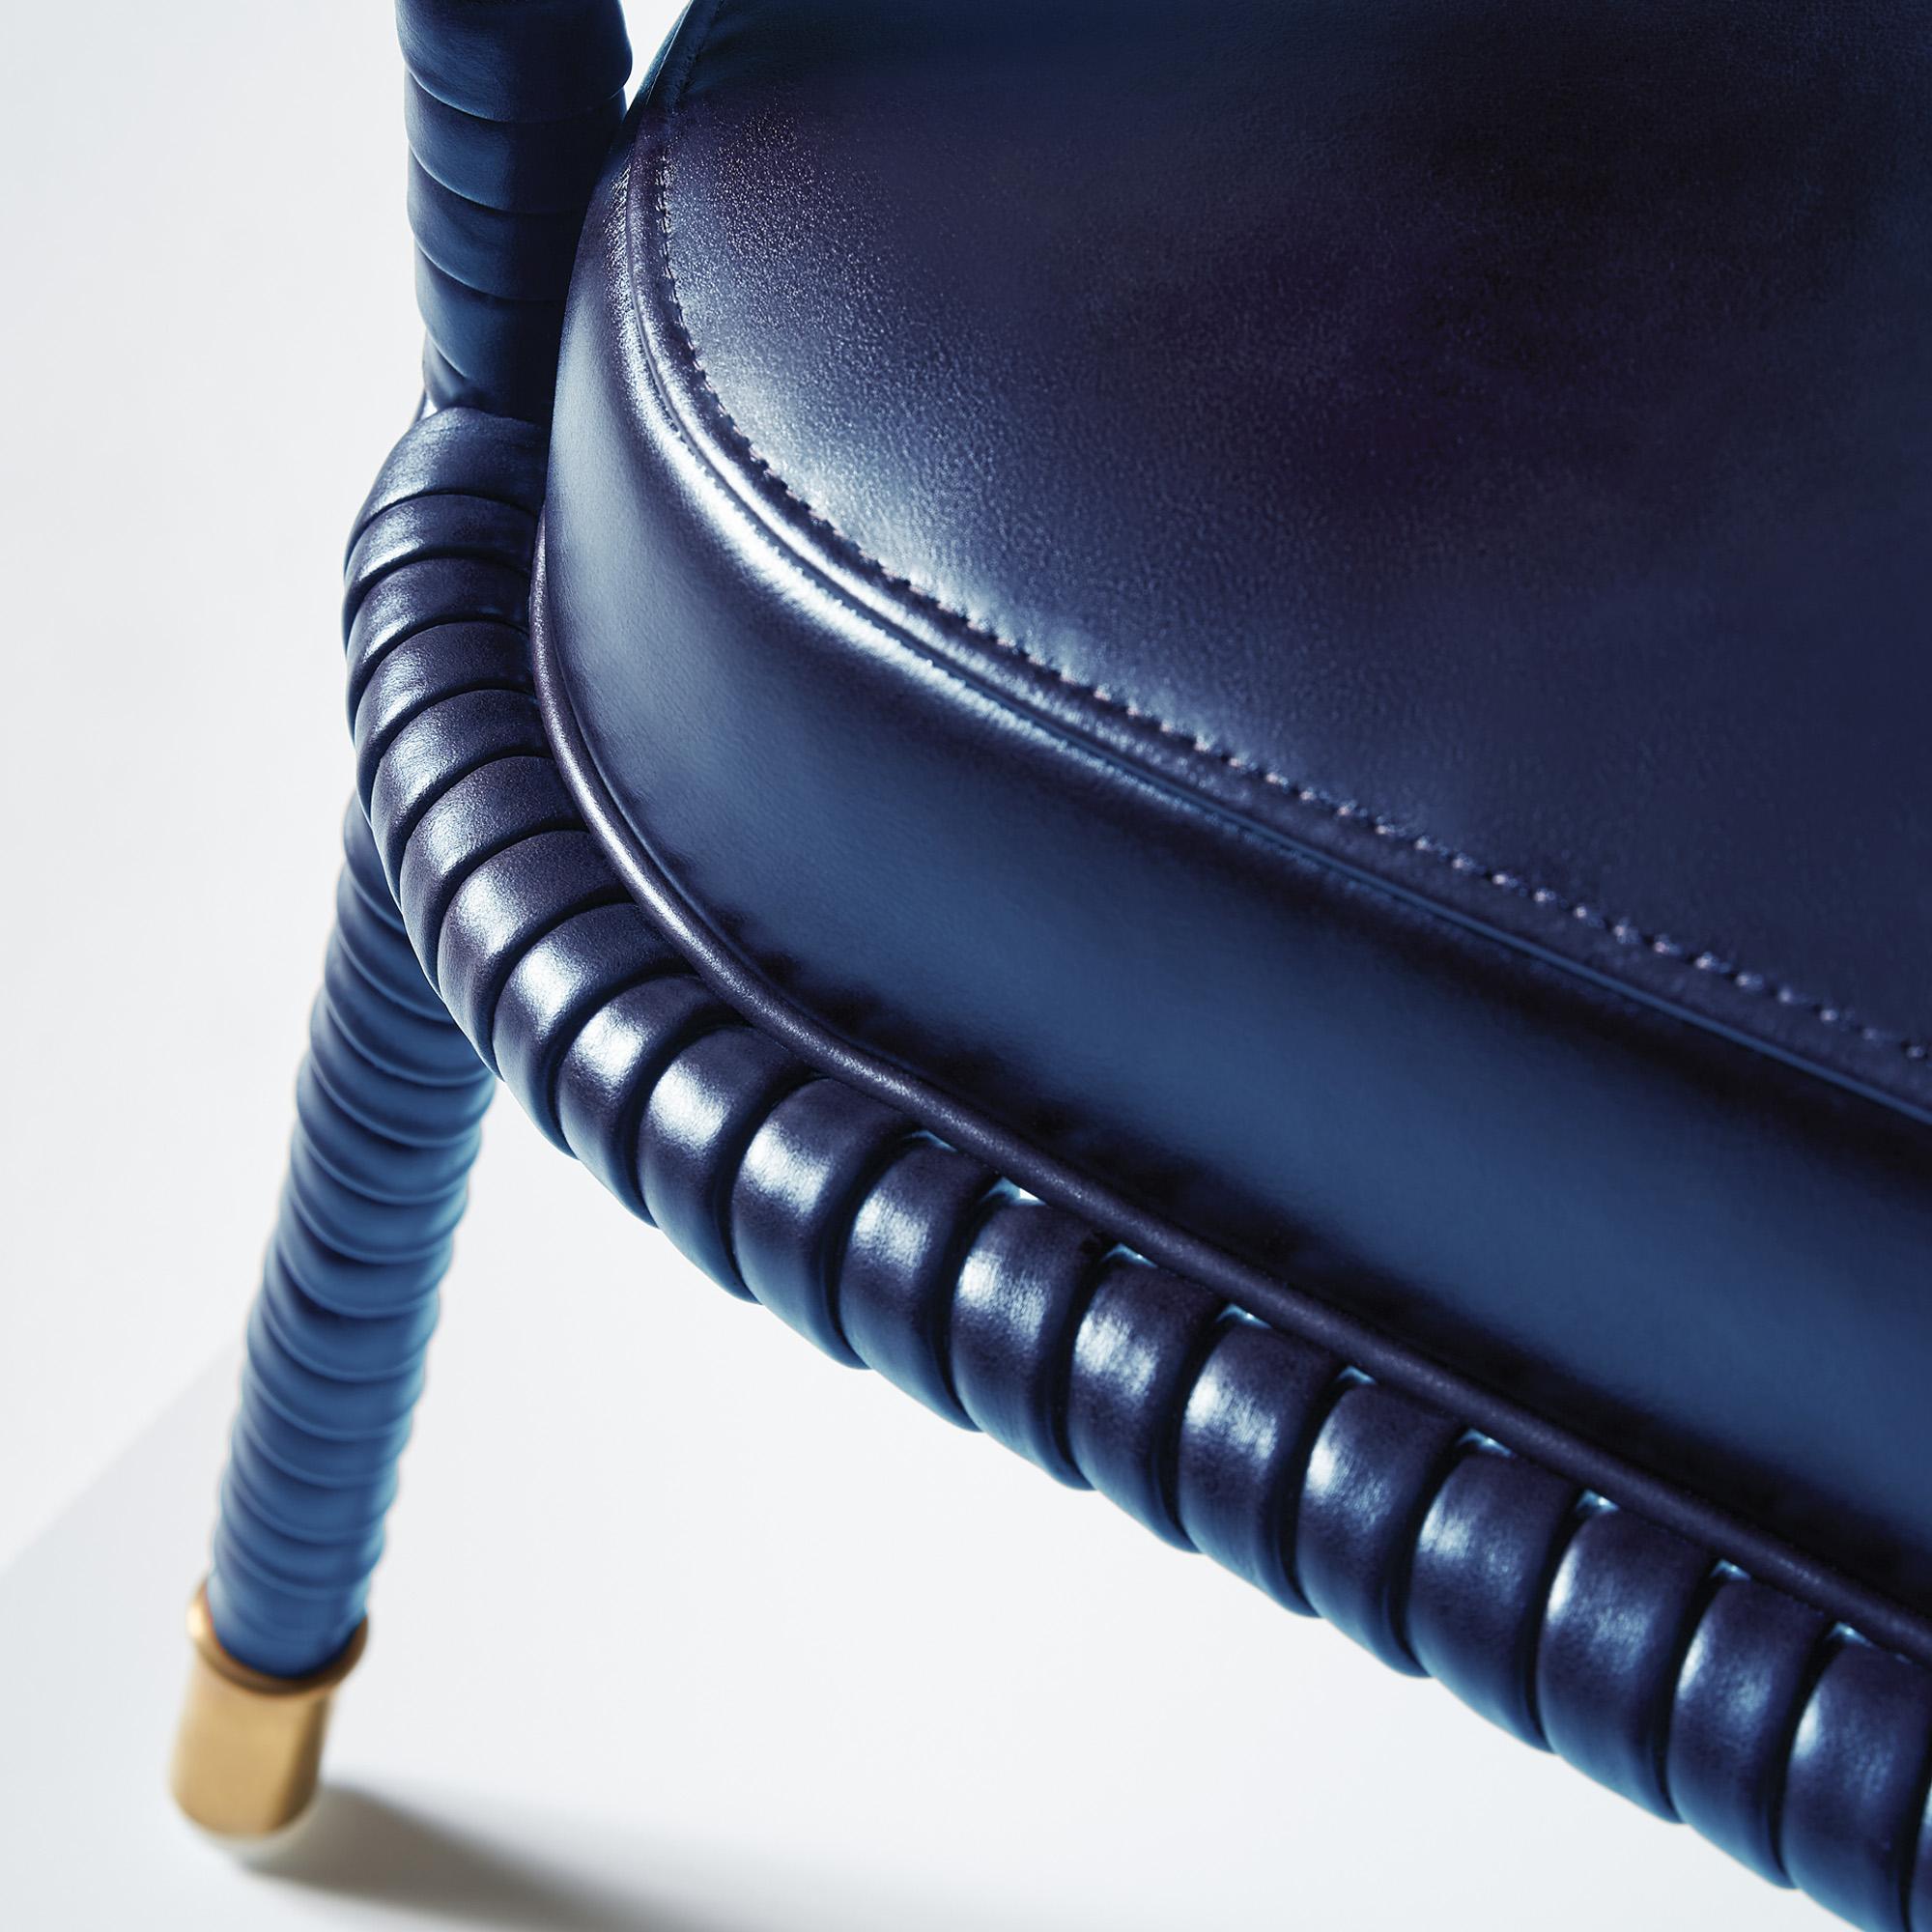 Easton Side Chair, Fully Wrapped Upholstered Leather in Navy Colour In New Condition For Sale In London, GB